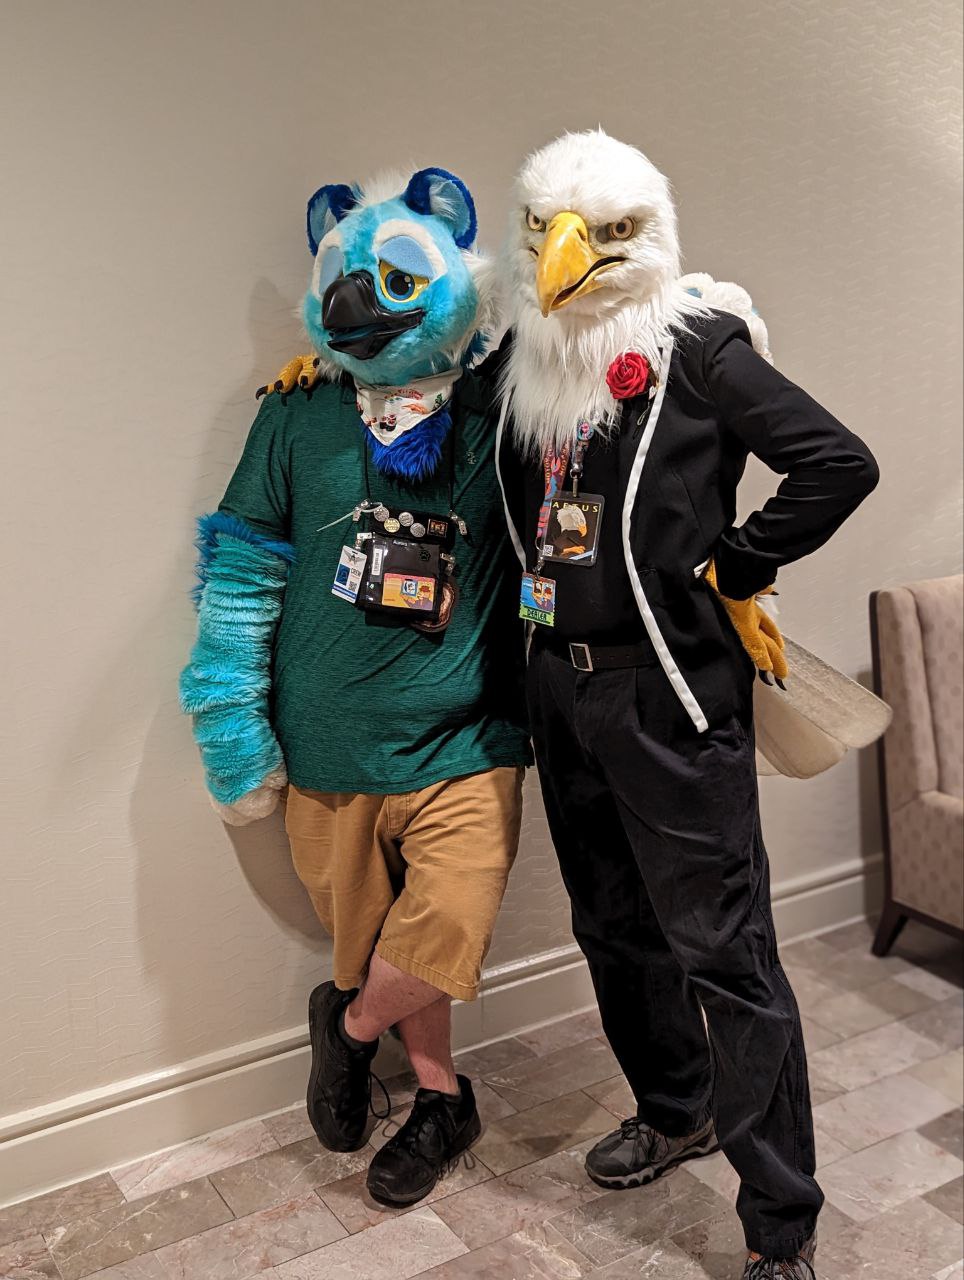 Me in my eagle costume with my blue penguin friend Aurora